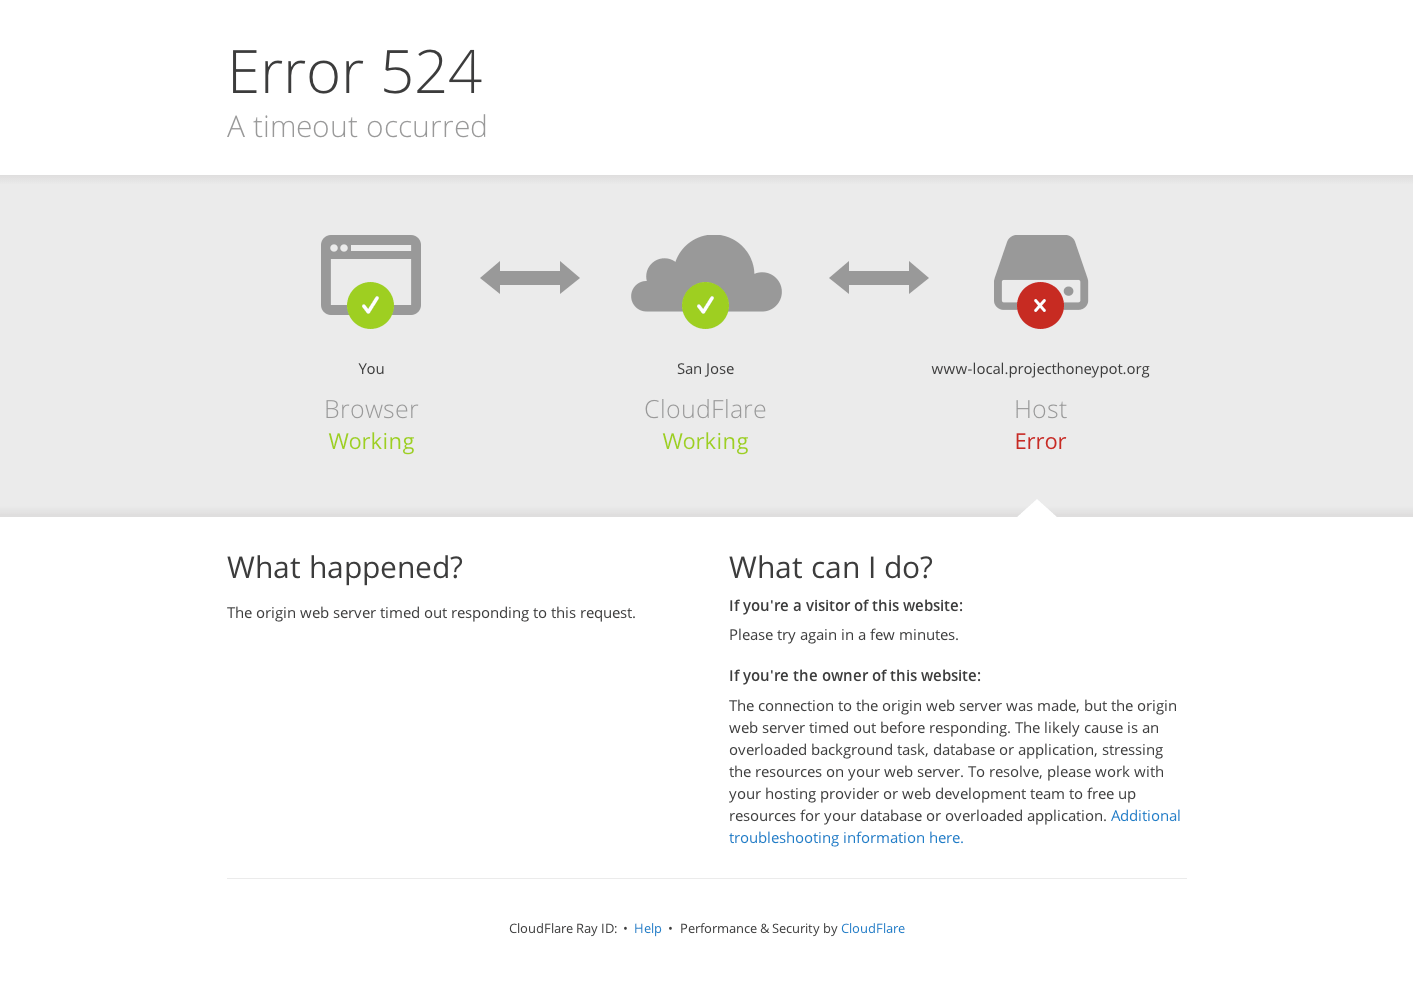 cloudflare_a_timeout_ocurred-min.png